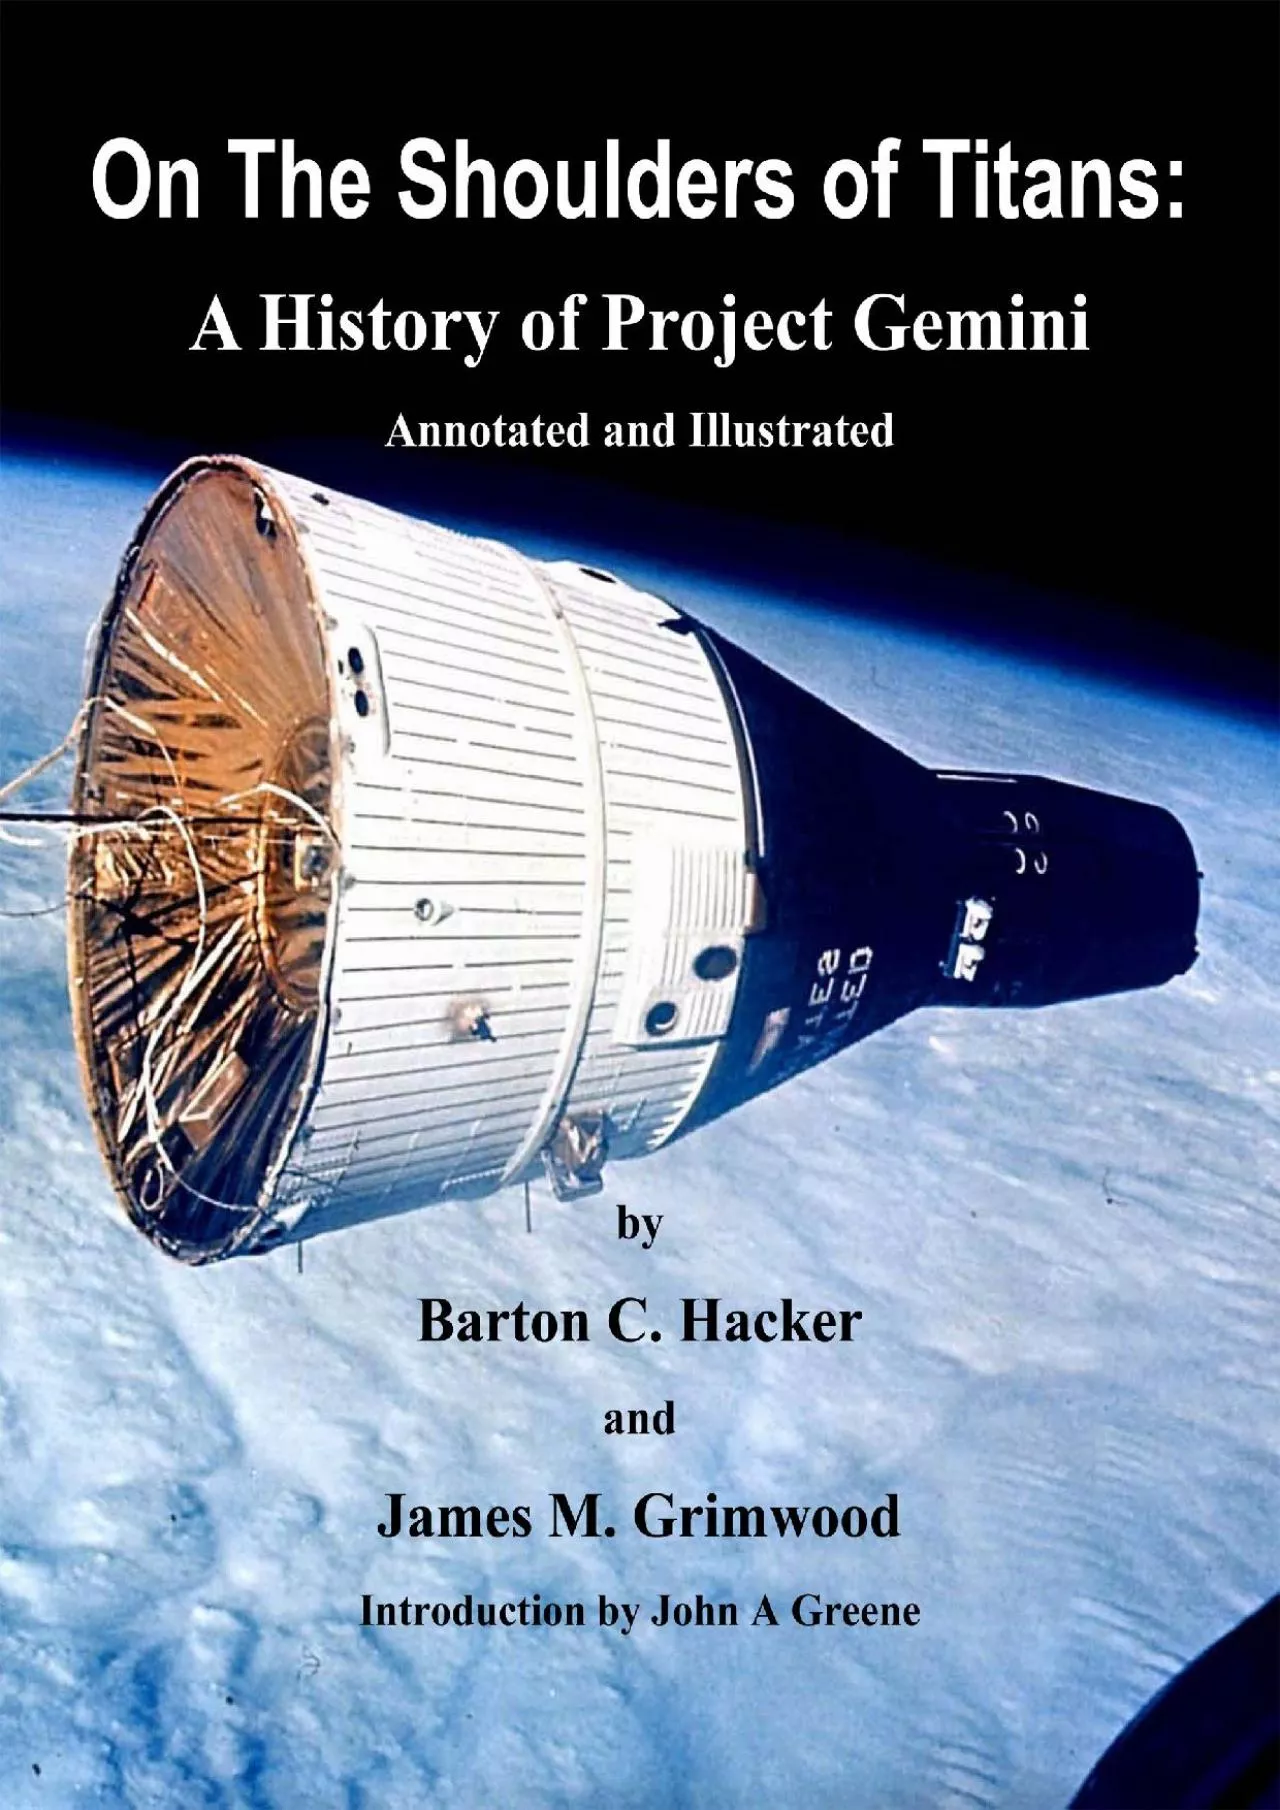 (EBOOK)-On The Shoulders of Titans: A History of Project Gemini (Annotated & Illustrated)